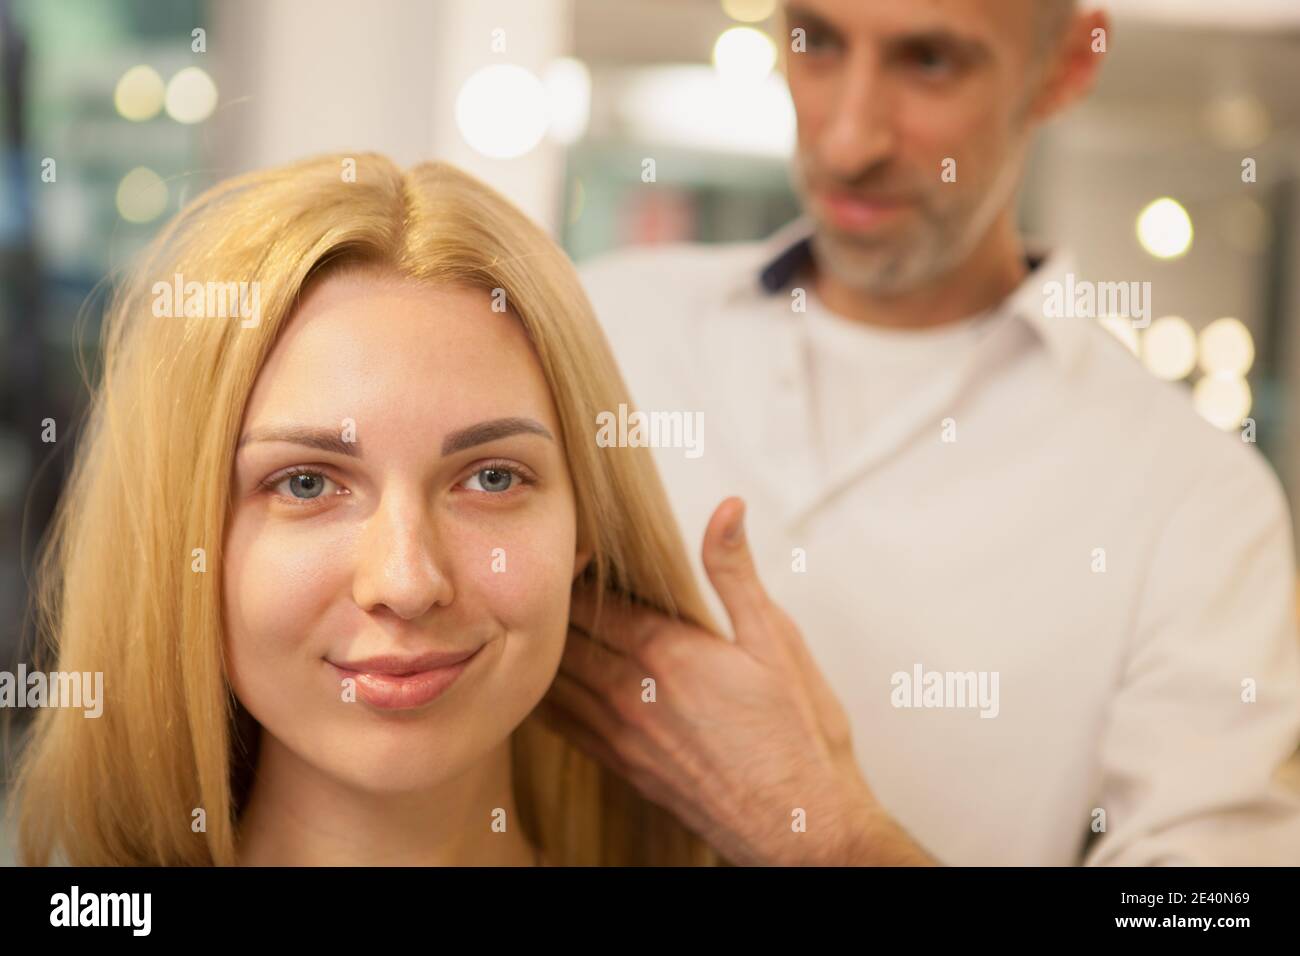 Cropped close up of a young lovely woman smiling, professional hairdresser examining her hair before haircut. Attractive female client at beauty salon Stock Photo